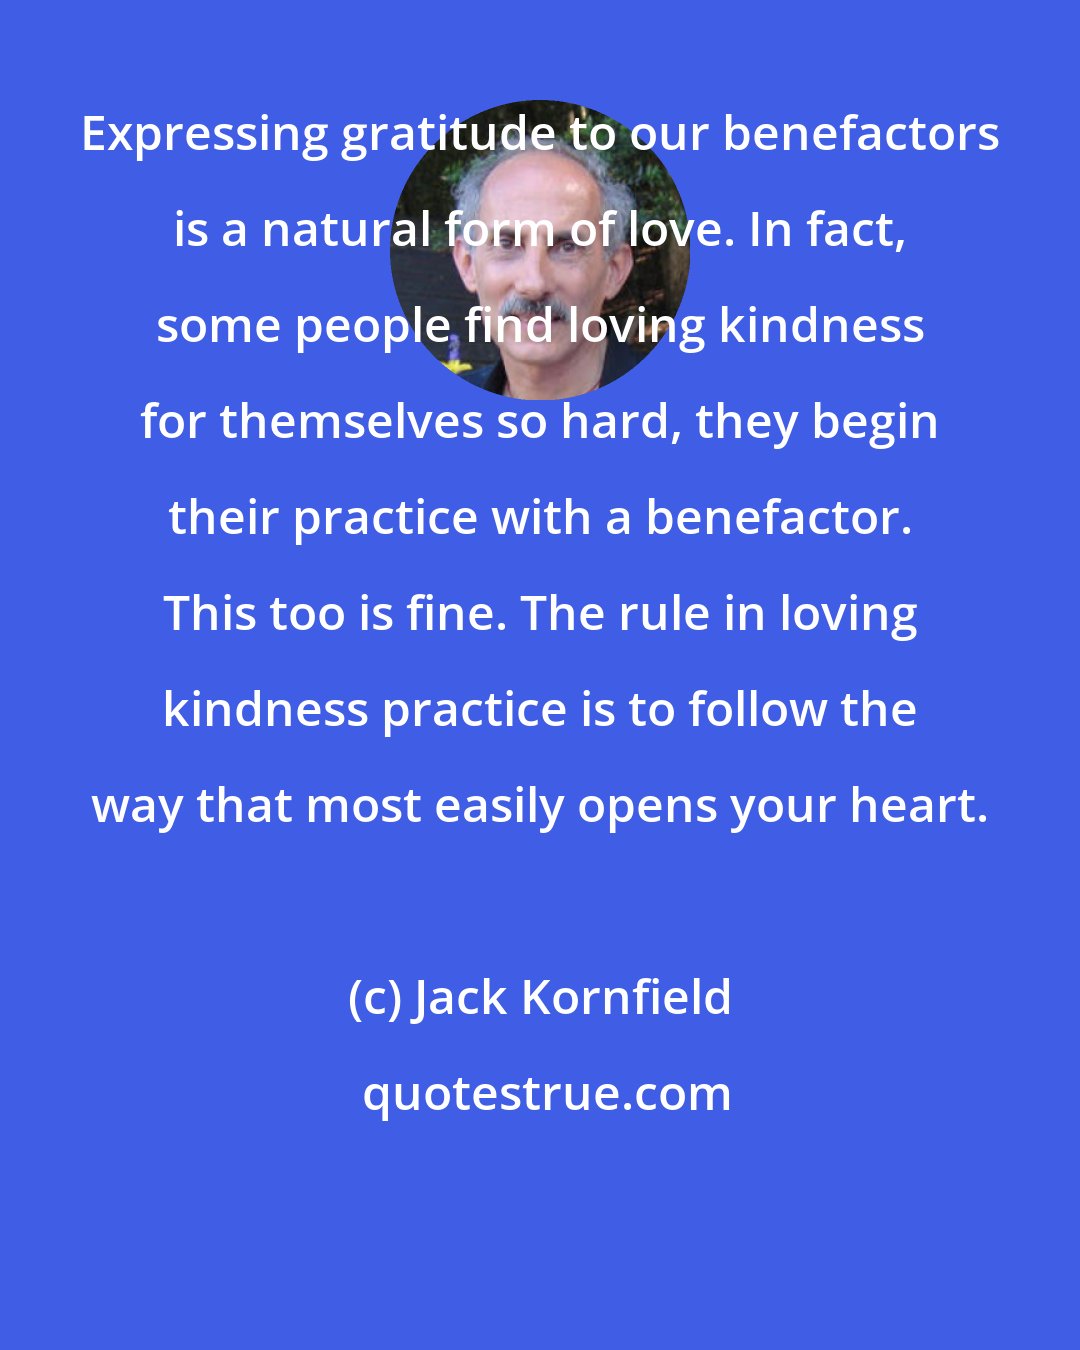 Jack Kornfield: Expressing gratitude to our benefactors is a natural form of love. In fact, some people find loving kindness for themselves so hard, they begin their practice with a benefactor. This too is fine. The rule in loving kindness practice is to follow the way that most easily opens your heart.